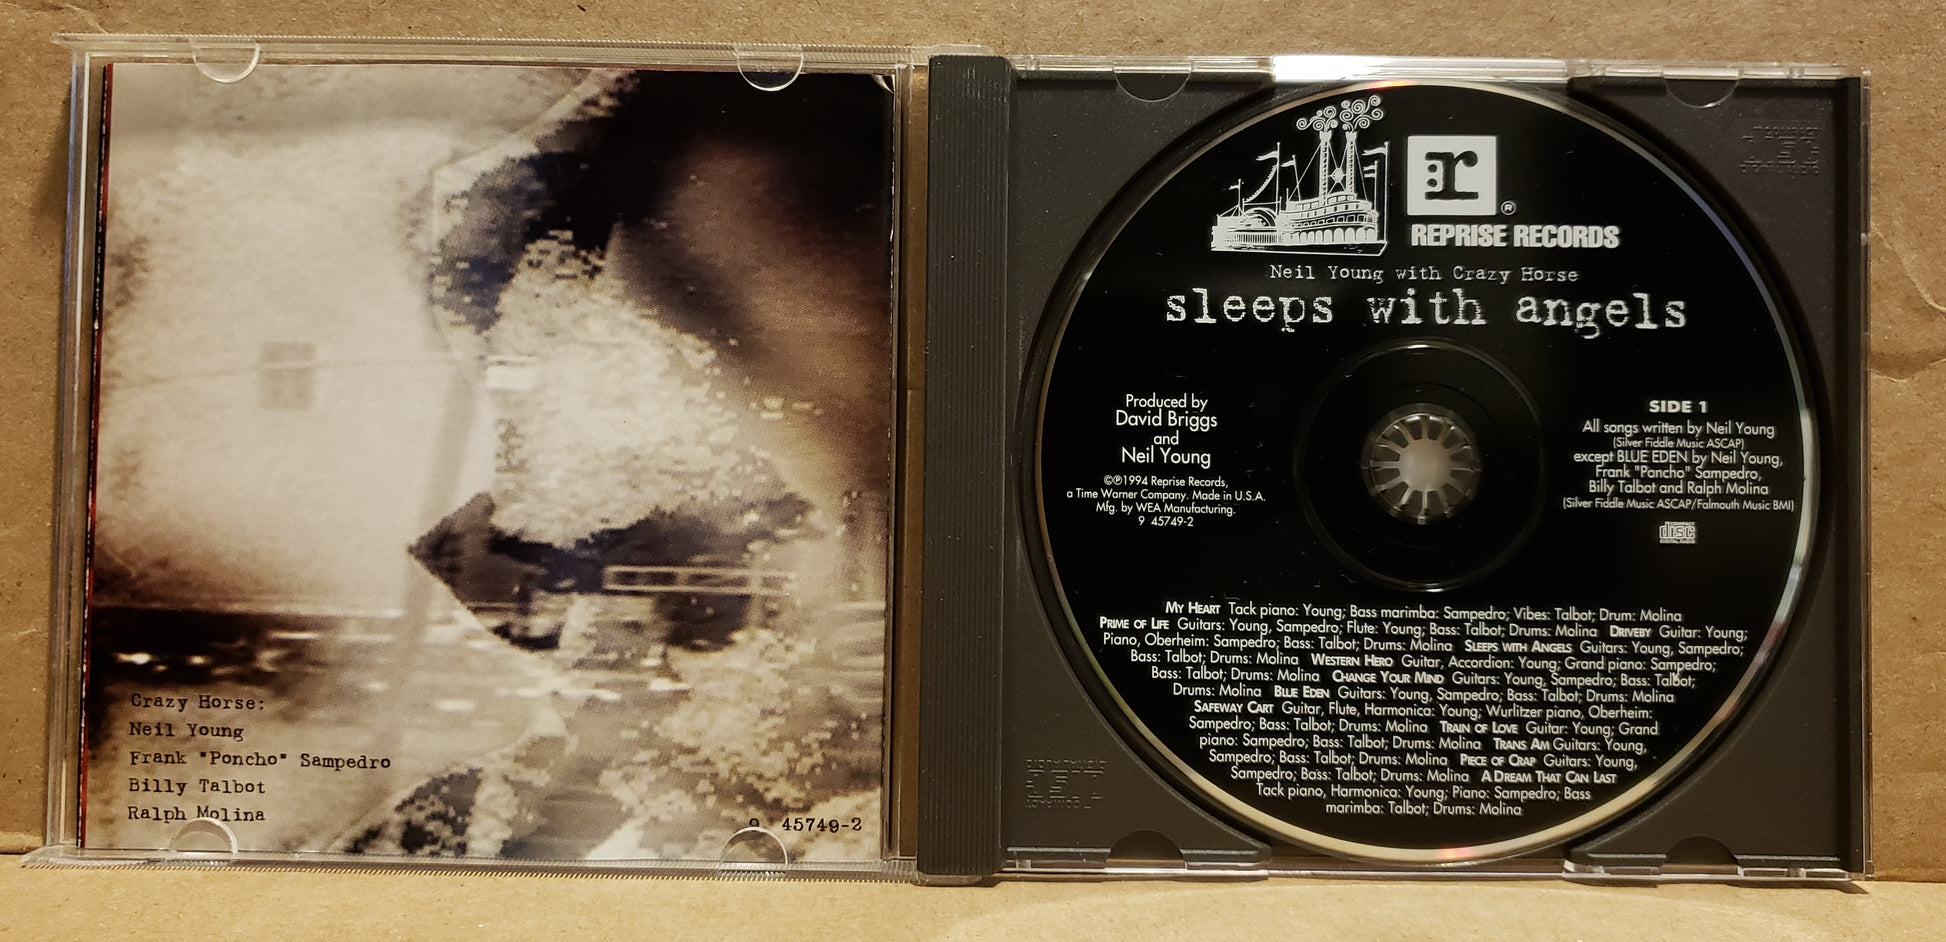 Neil Young and Crazy Horse - Sleeps With Angels [1994 Used CD]